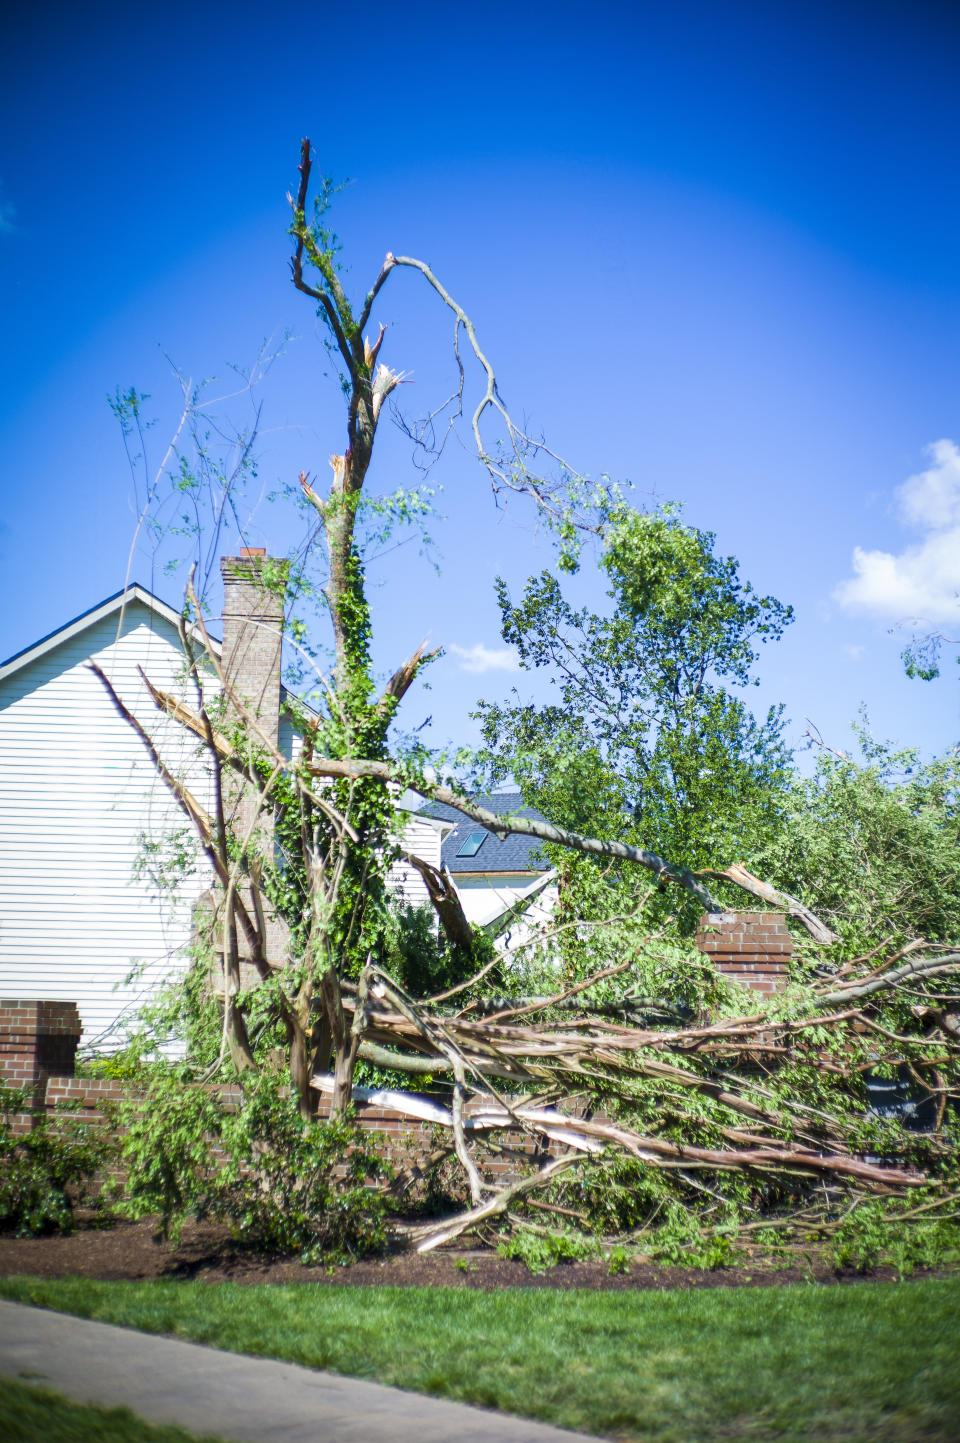 A toppled tree lies in the Great Neck area of Virginia Beach, Va., on Monday May 1, 2023. The City of Virginia Beach declared a state of emergency after a tornado moved through the area Sunday and damaged dozens of homes, downed trees and caused gas leaks. (AP Photo/John C. Clark)